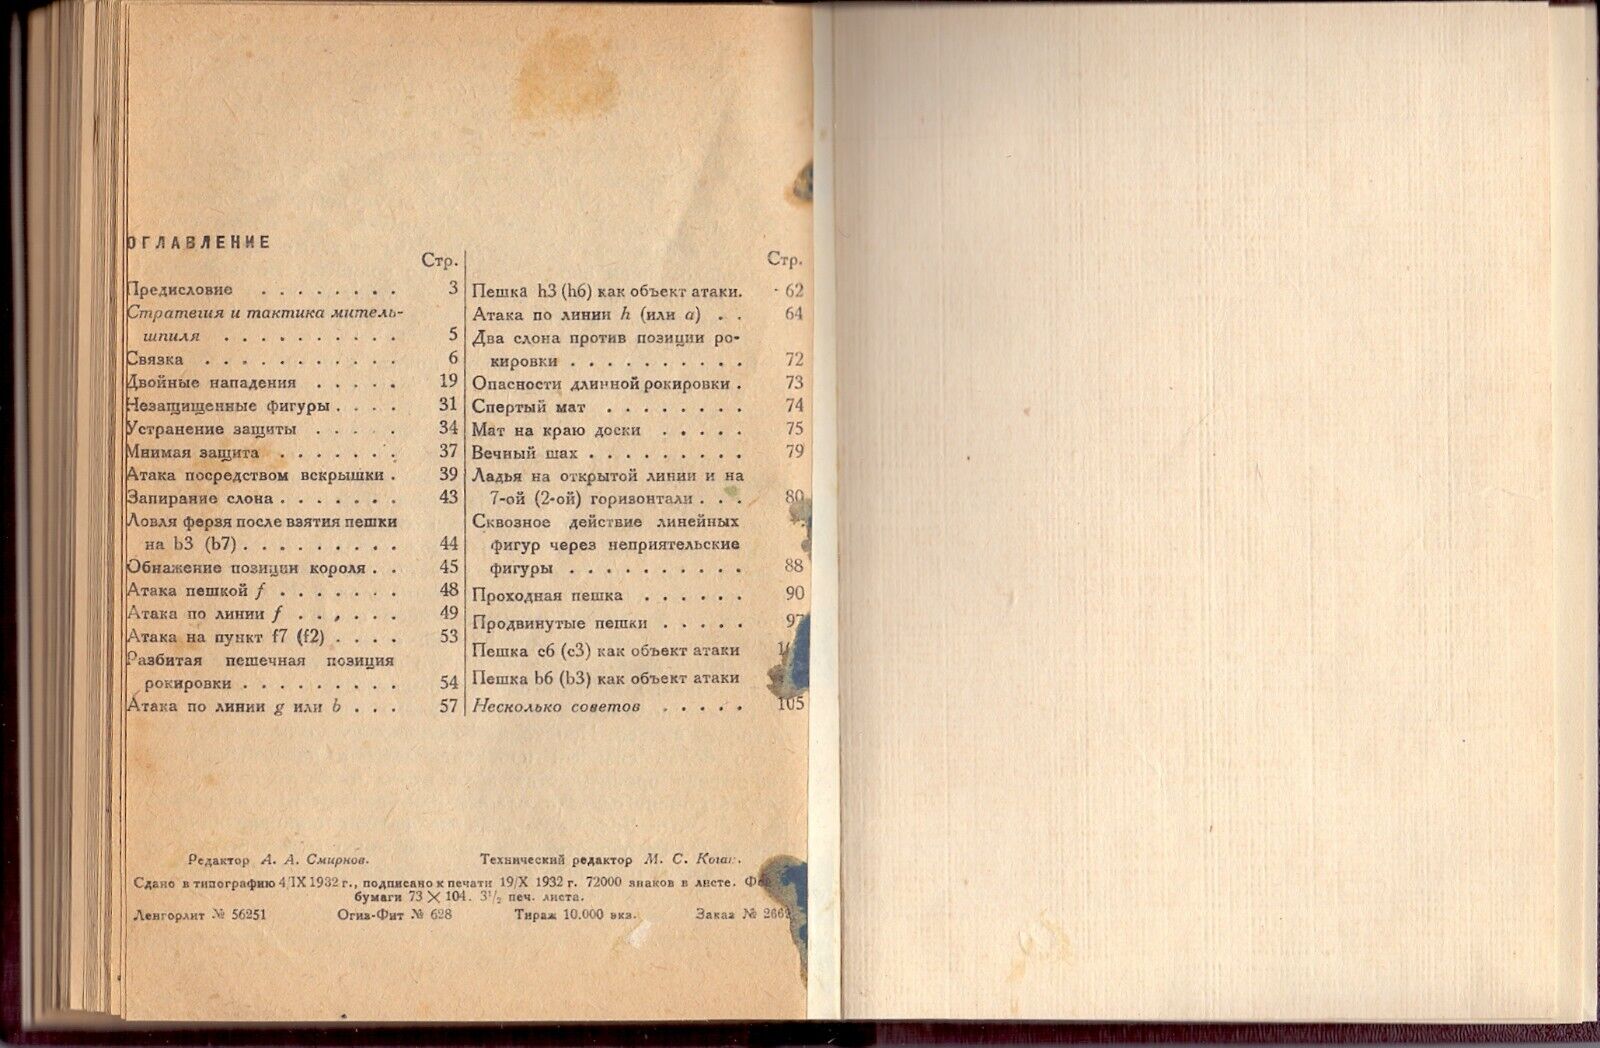 11541.Russian chess book: S. Tarrasch. 1932 About the middlegame